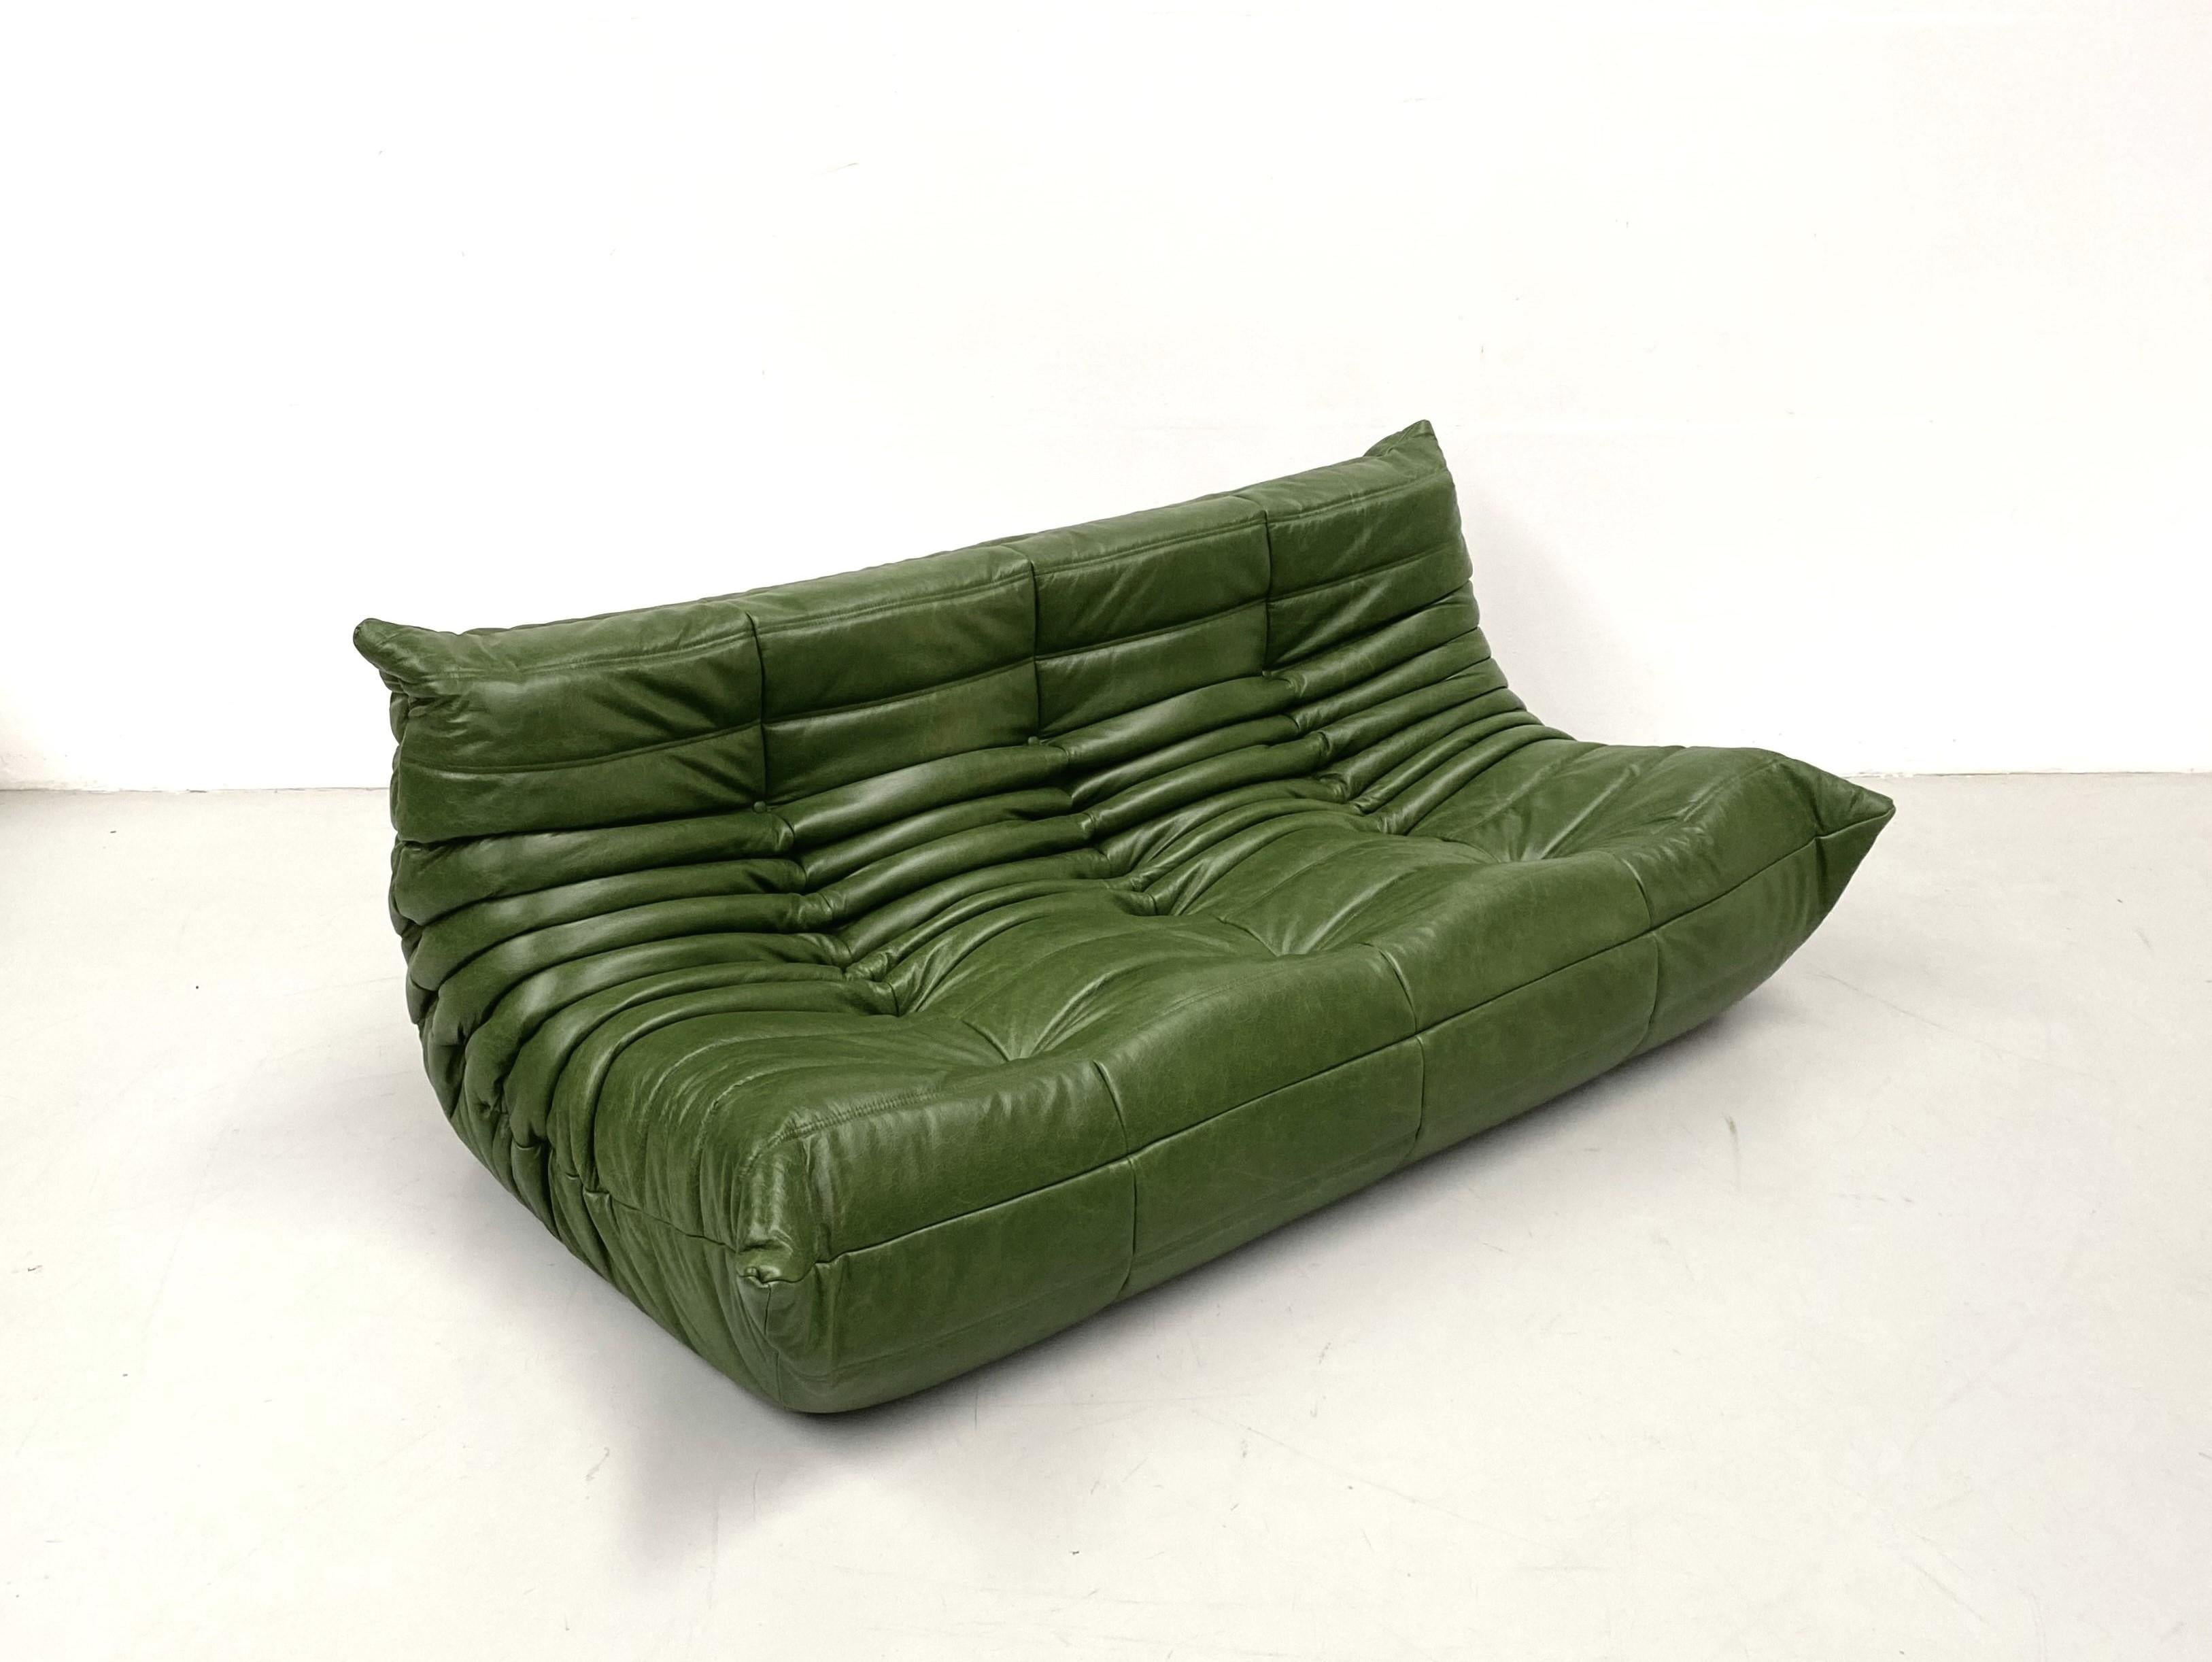 Vintage French Togo Sofa in Forest Green Leather by M. Ducaroy for Ligne Roset 1